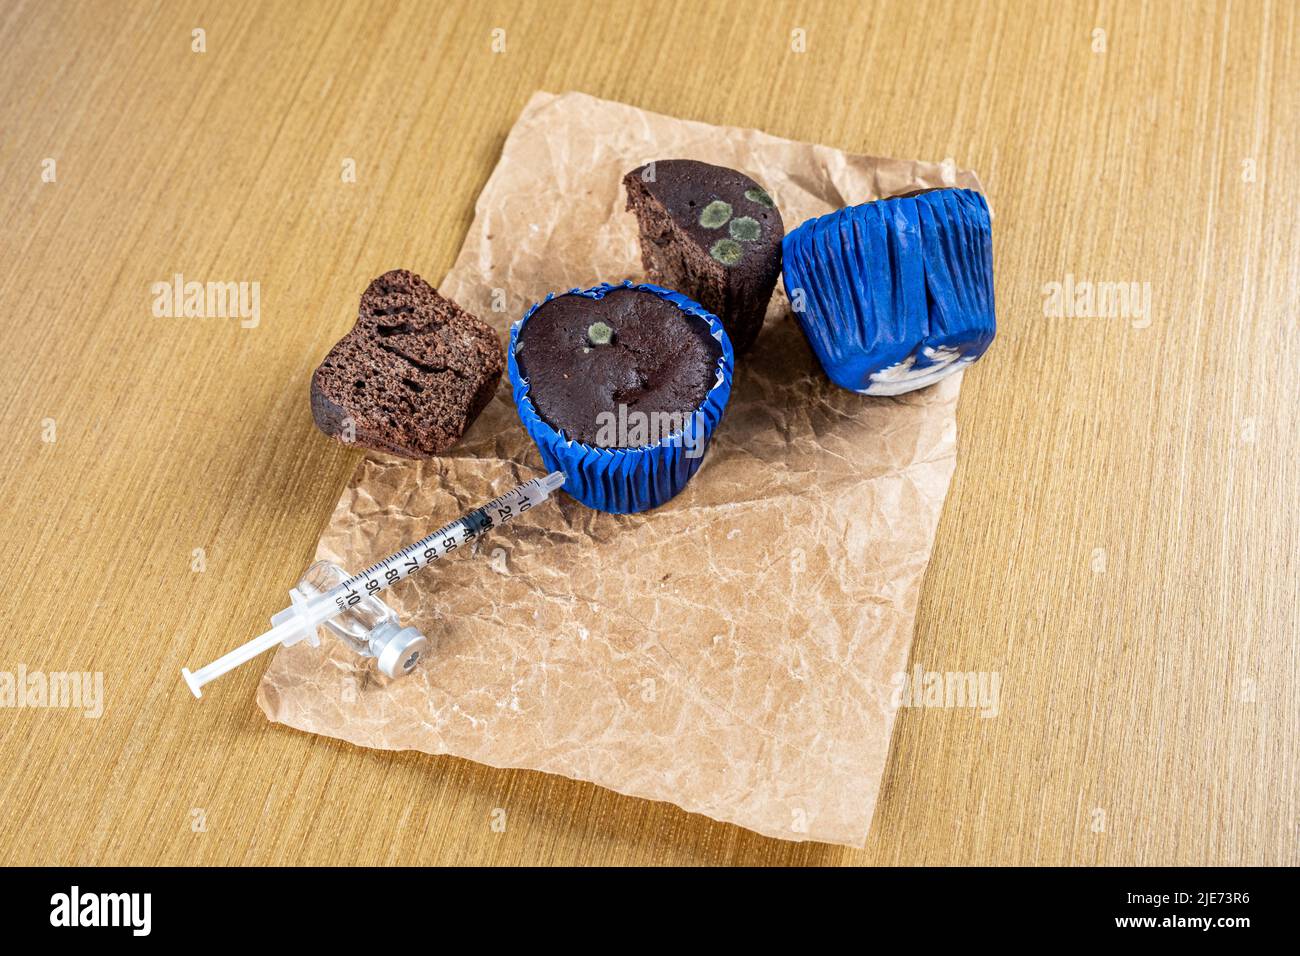 Syringe injecting insulin into moldy chocolate muffin. Stock Photo